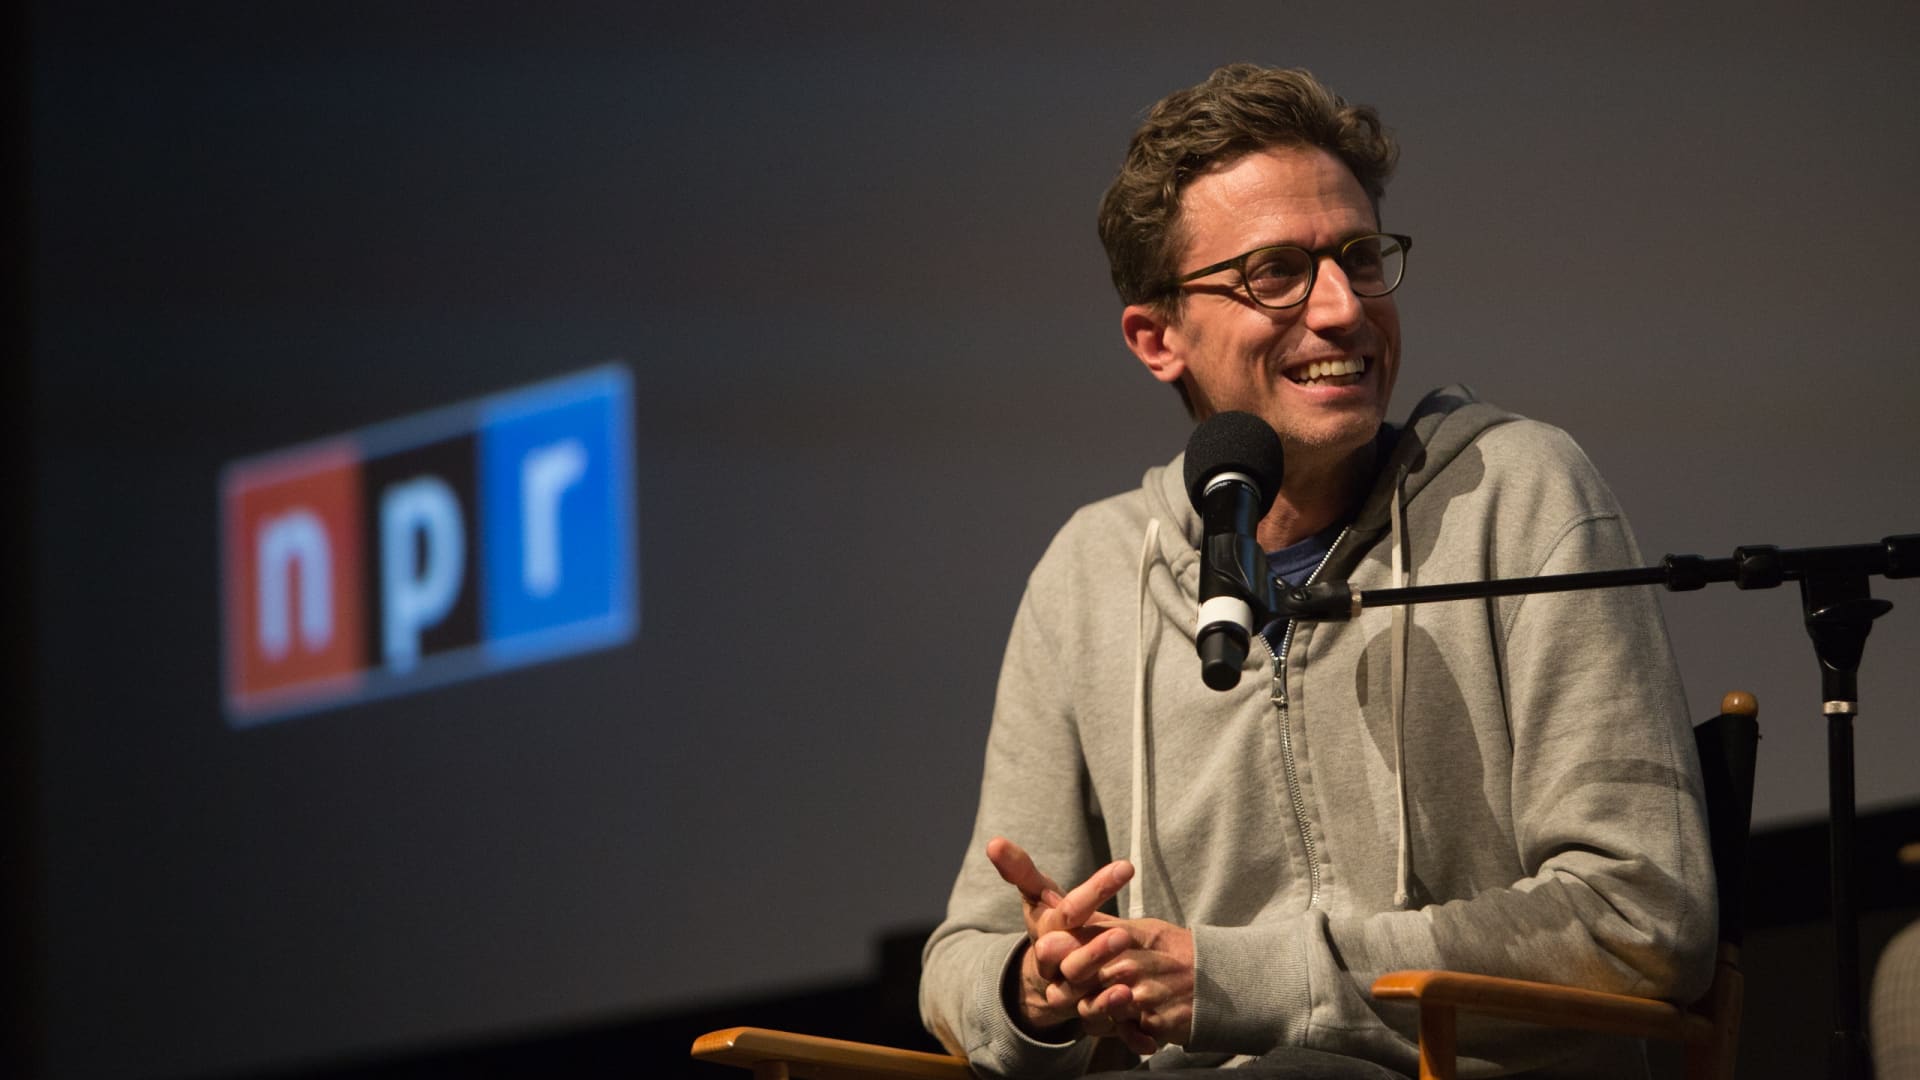 Jonah Peretti, founder and CEO of Buzzfeed; co-founder of the Huffington Post